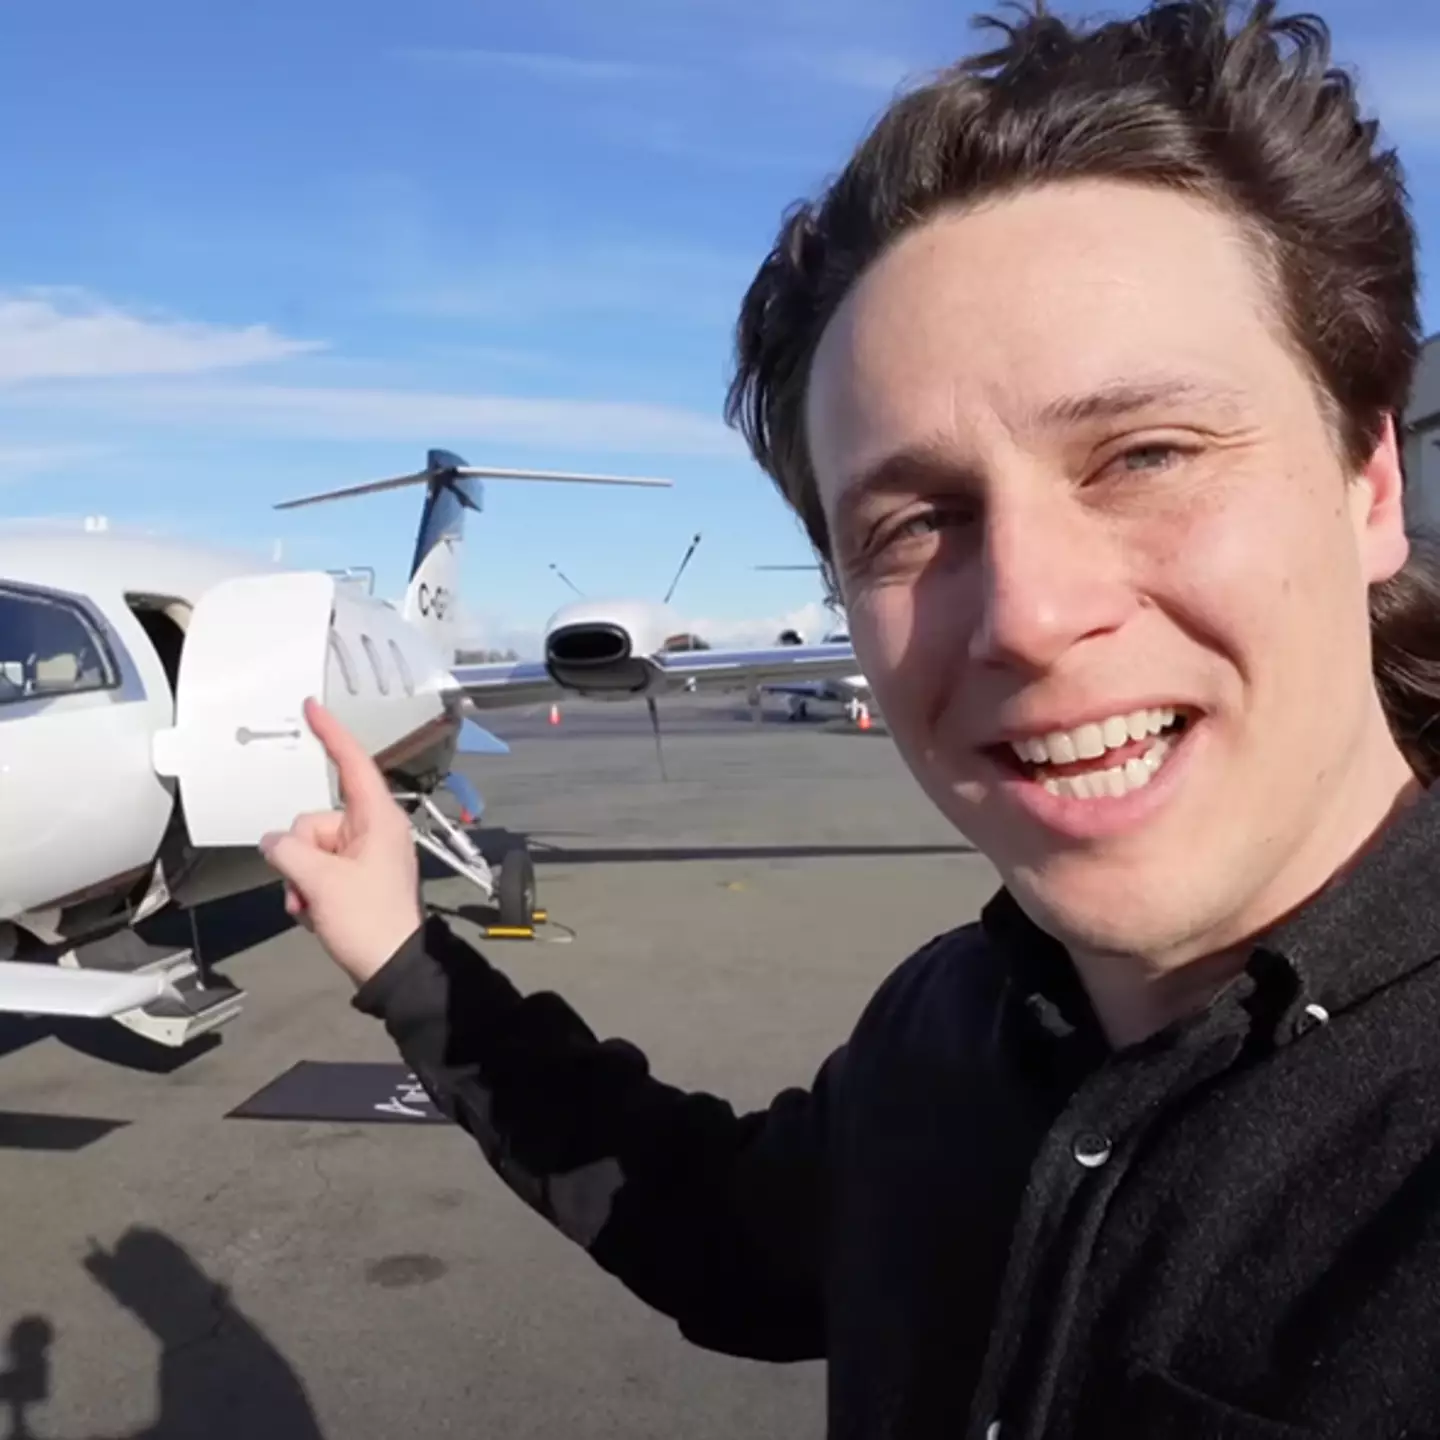 Man tries out ‘Uber’ for private jets and flies 'like a millionaire' for under $550